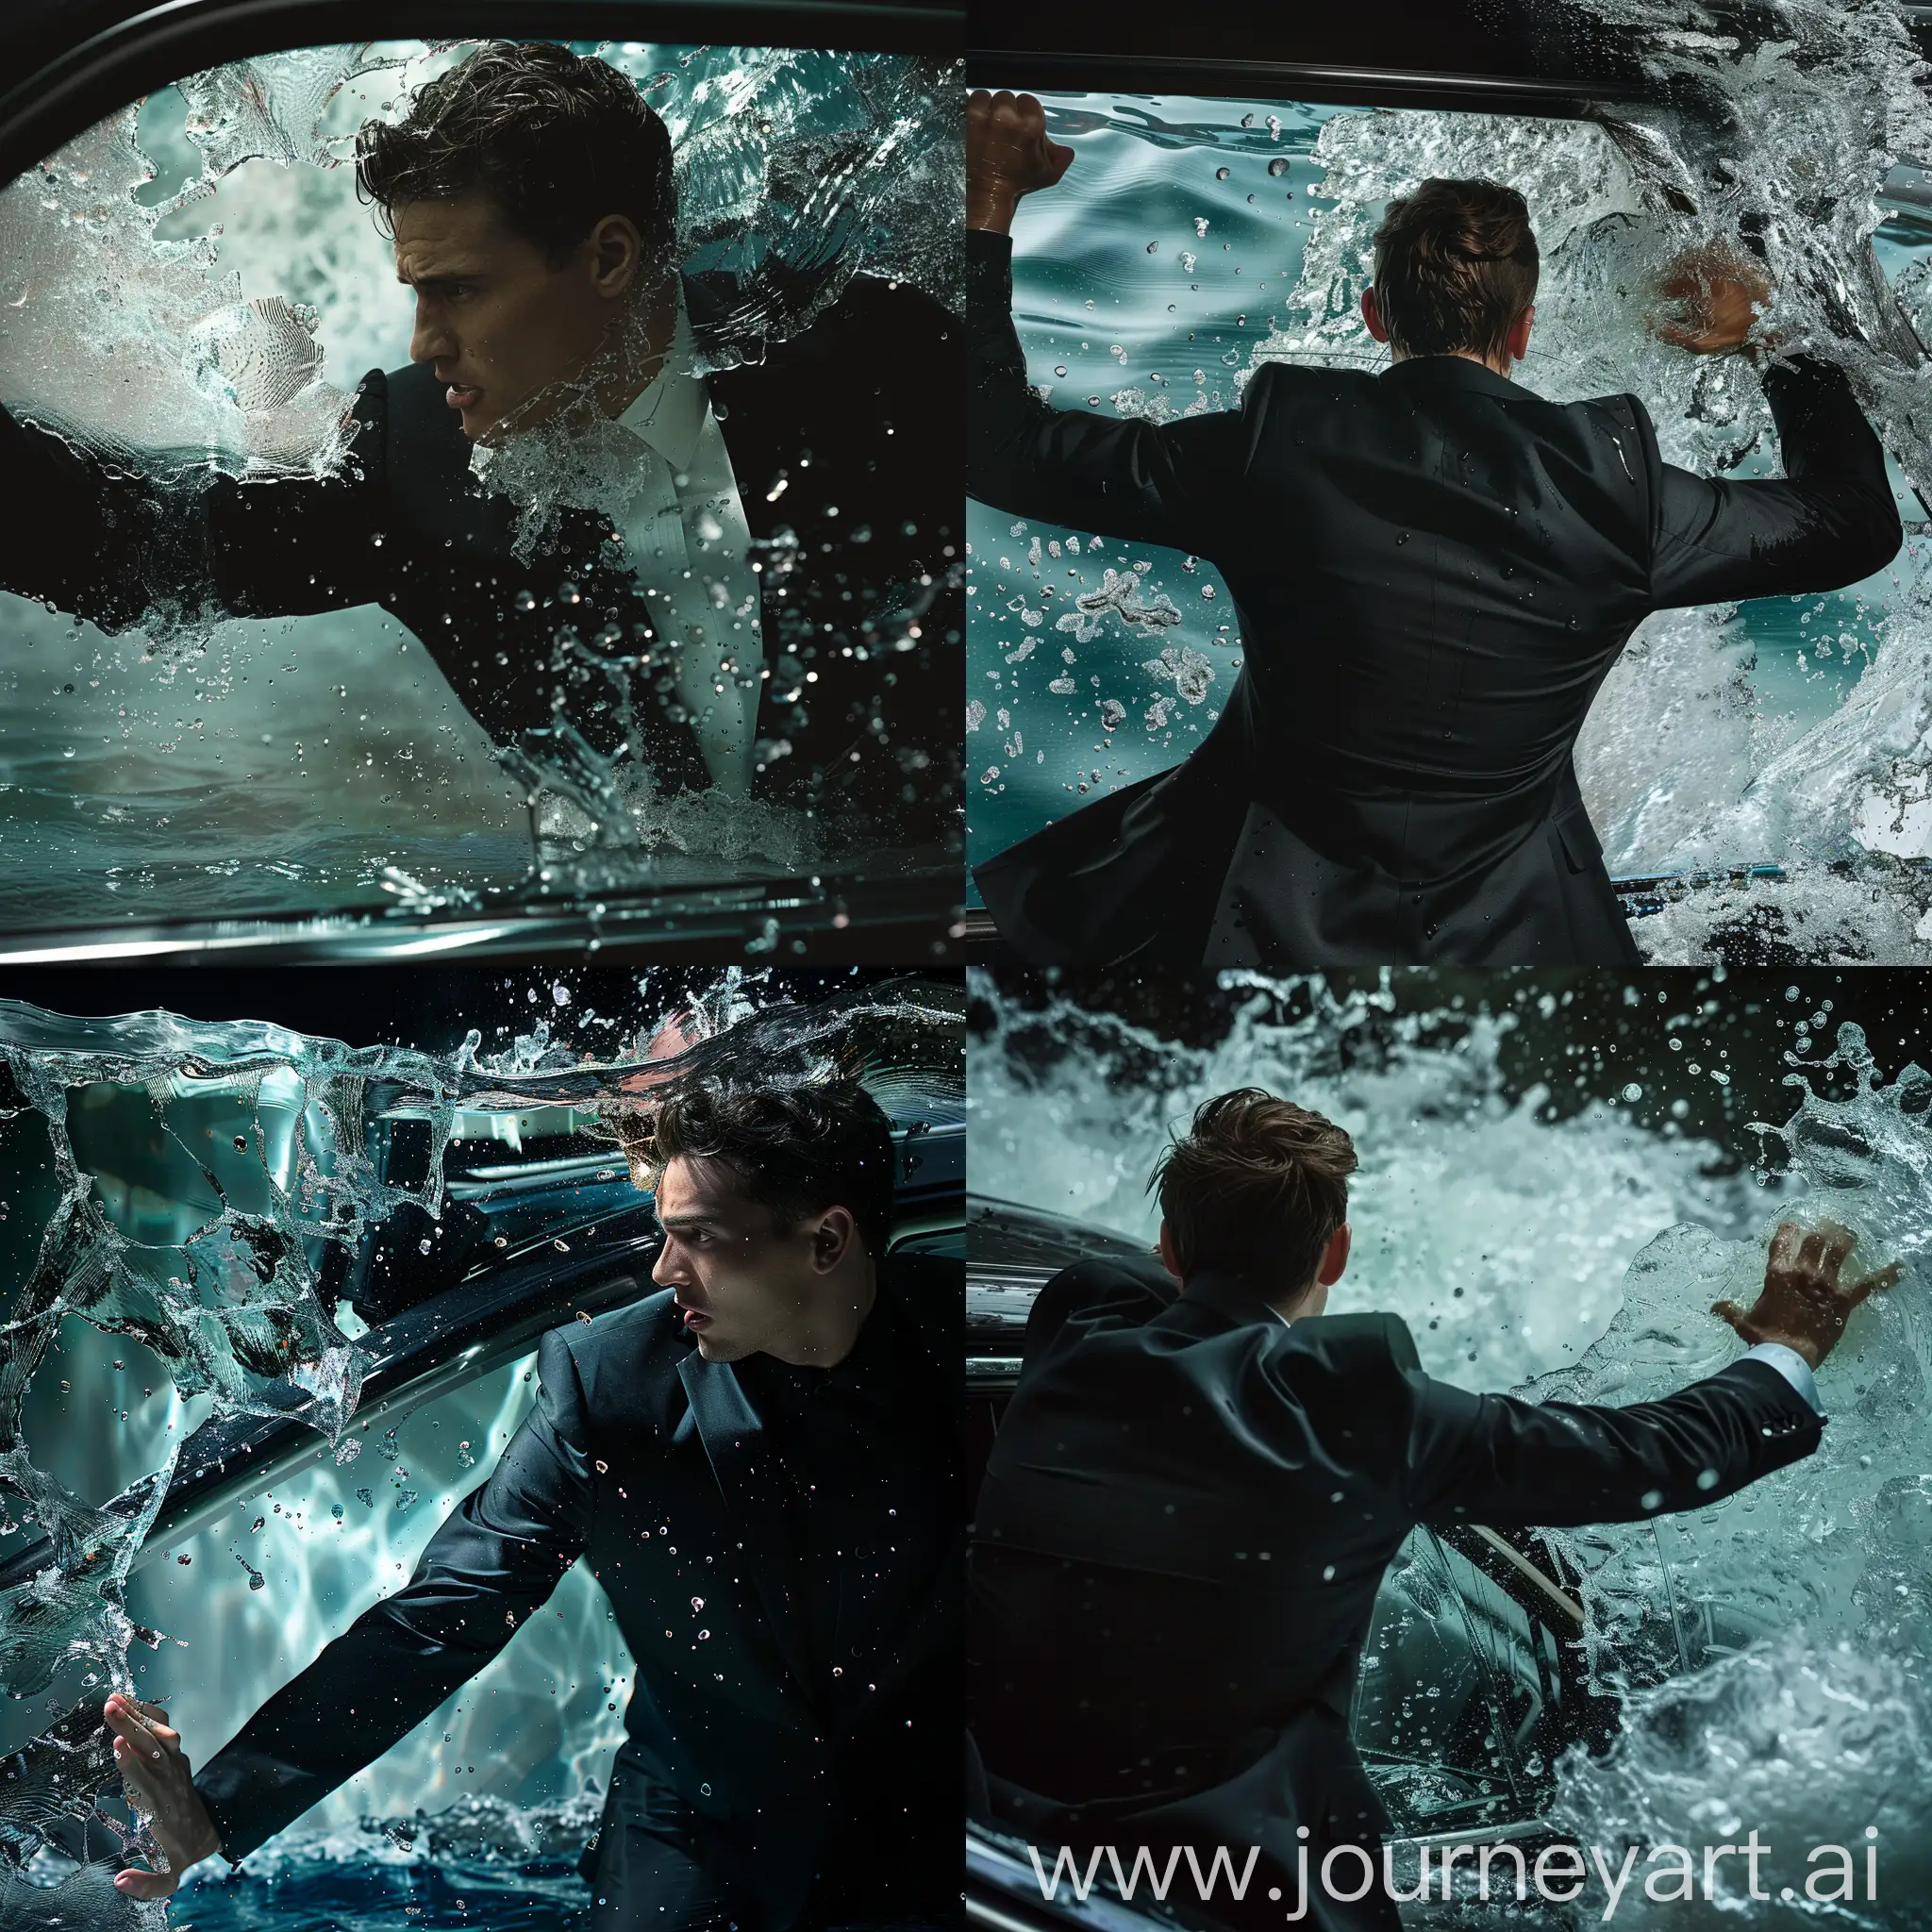 man breaking the window to escape  in a car under water, elegant black suit, realistic